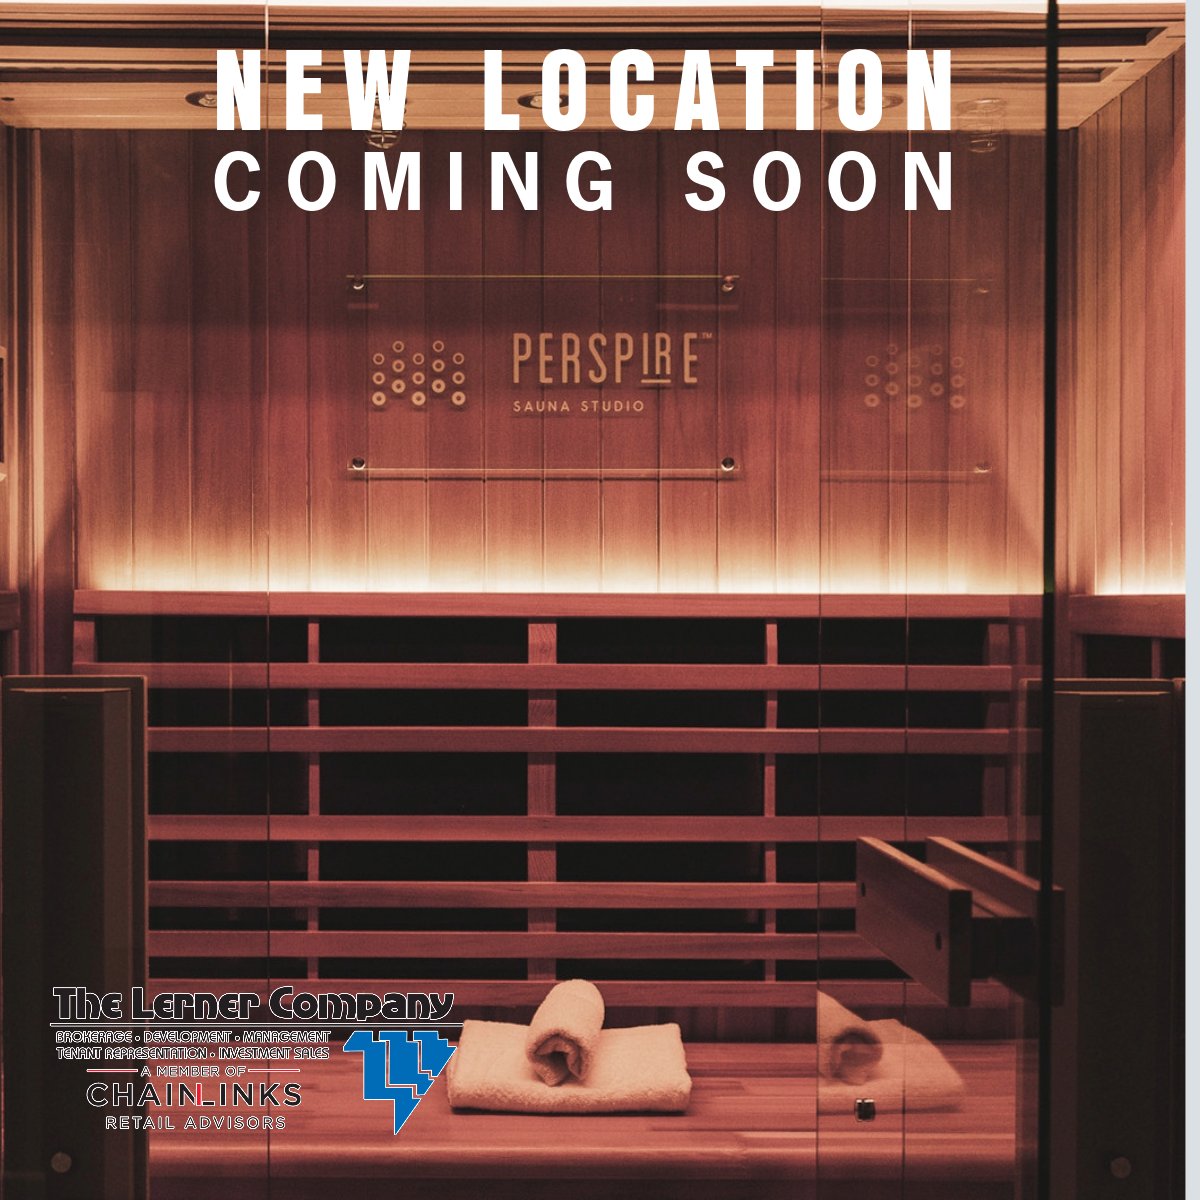 Get ready to SWEAT, SMILE, and SHINE. Perspire is excited to announce their SECOND location in Omaha at 18122 Wright St. Watch for opening dates coming soon. All thanks to Jared Sullivan for closing another deal with Perspire.